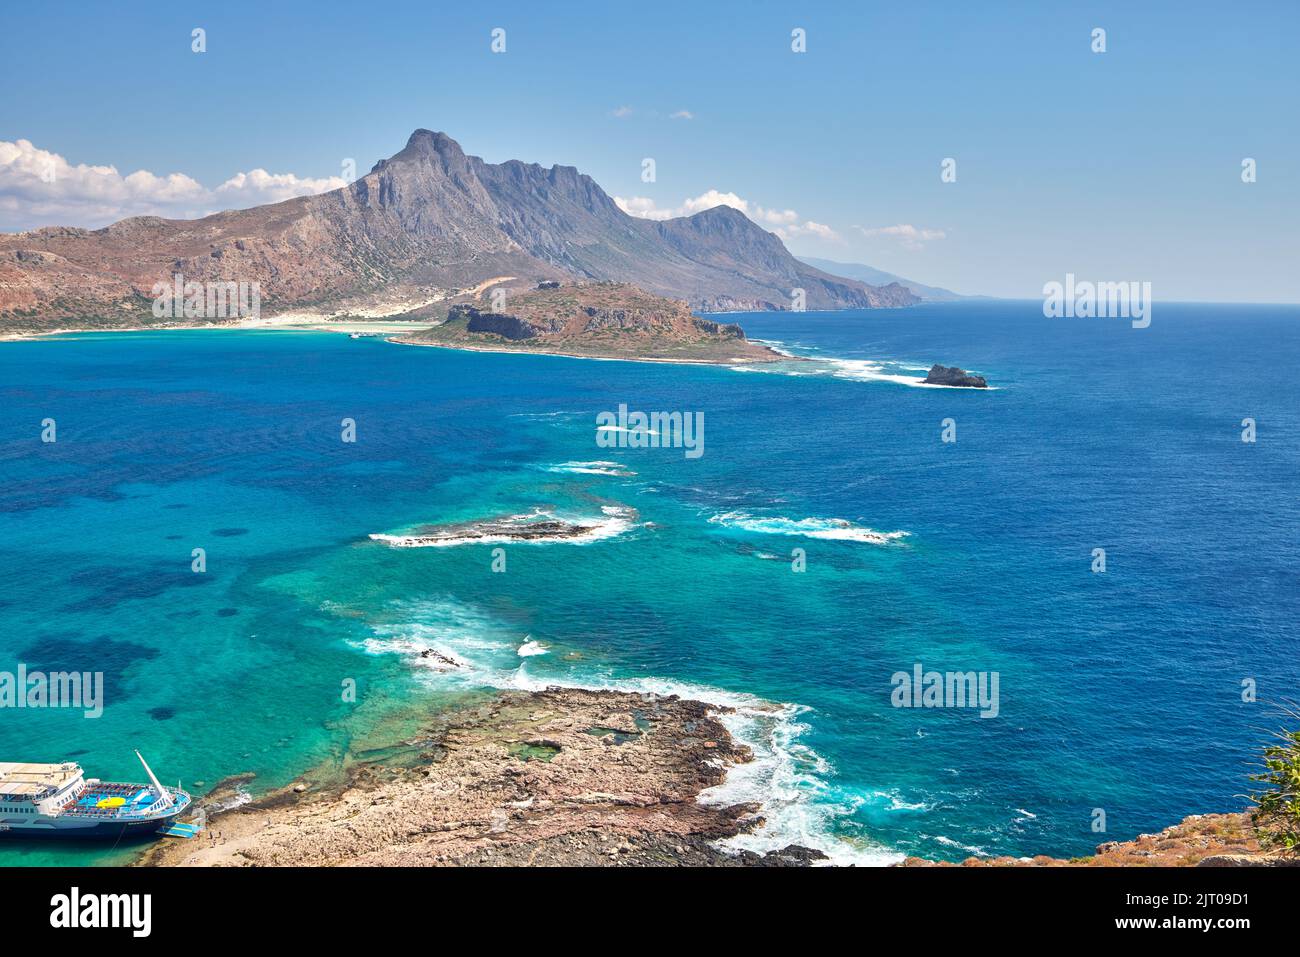 Amazing scenery of Greek islands - Balos bay with finest beaches and turquoise sea. Crete island Stock Photo